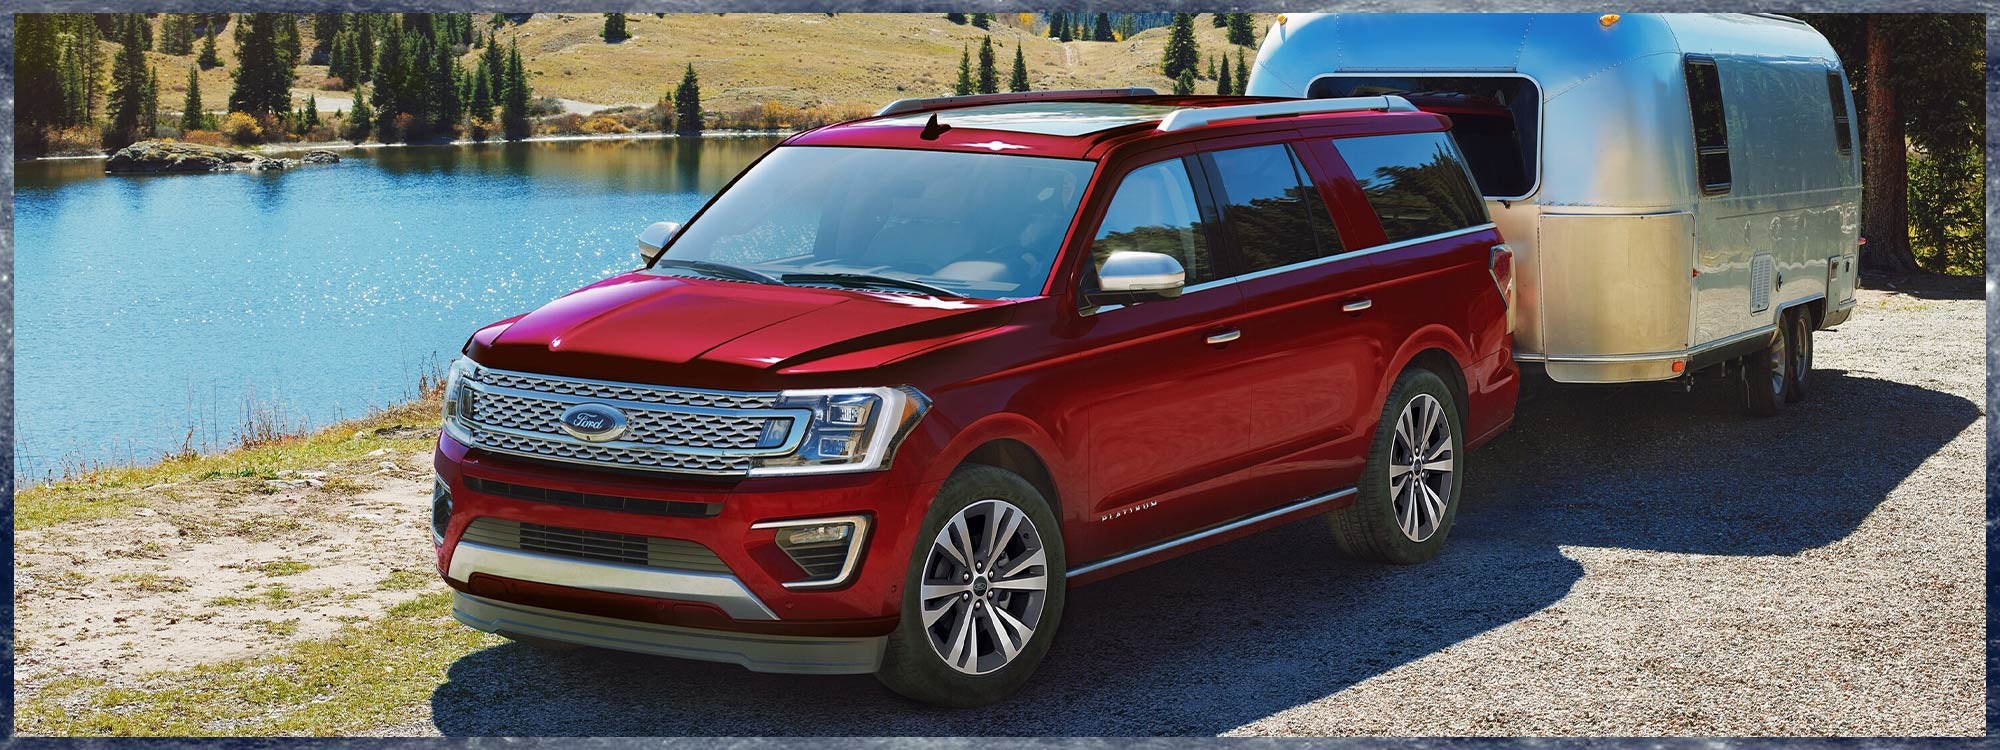 Ford Expedition towing capacity